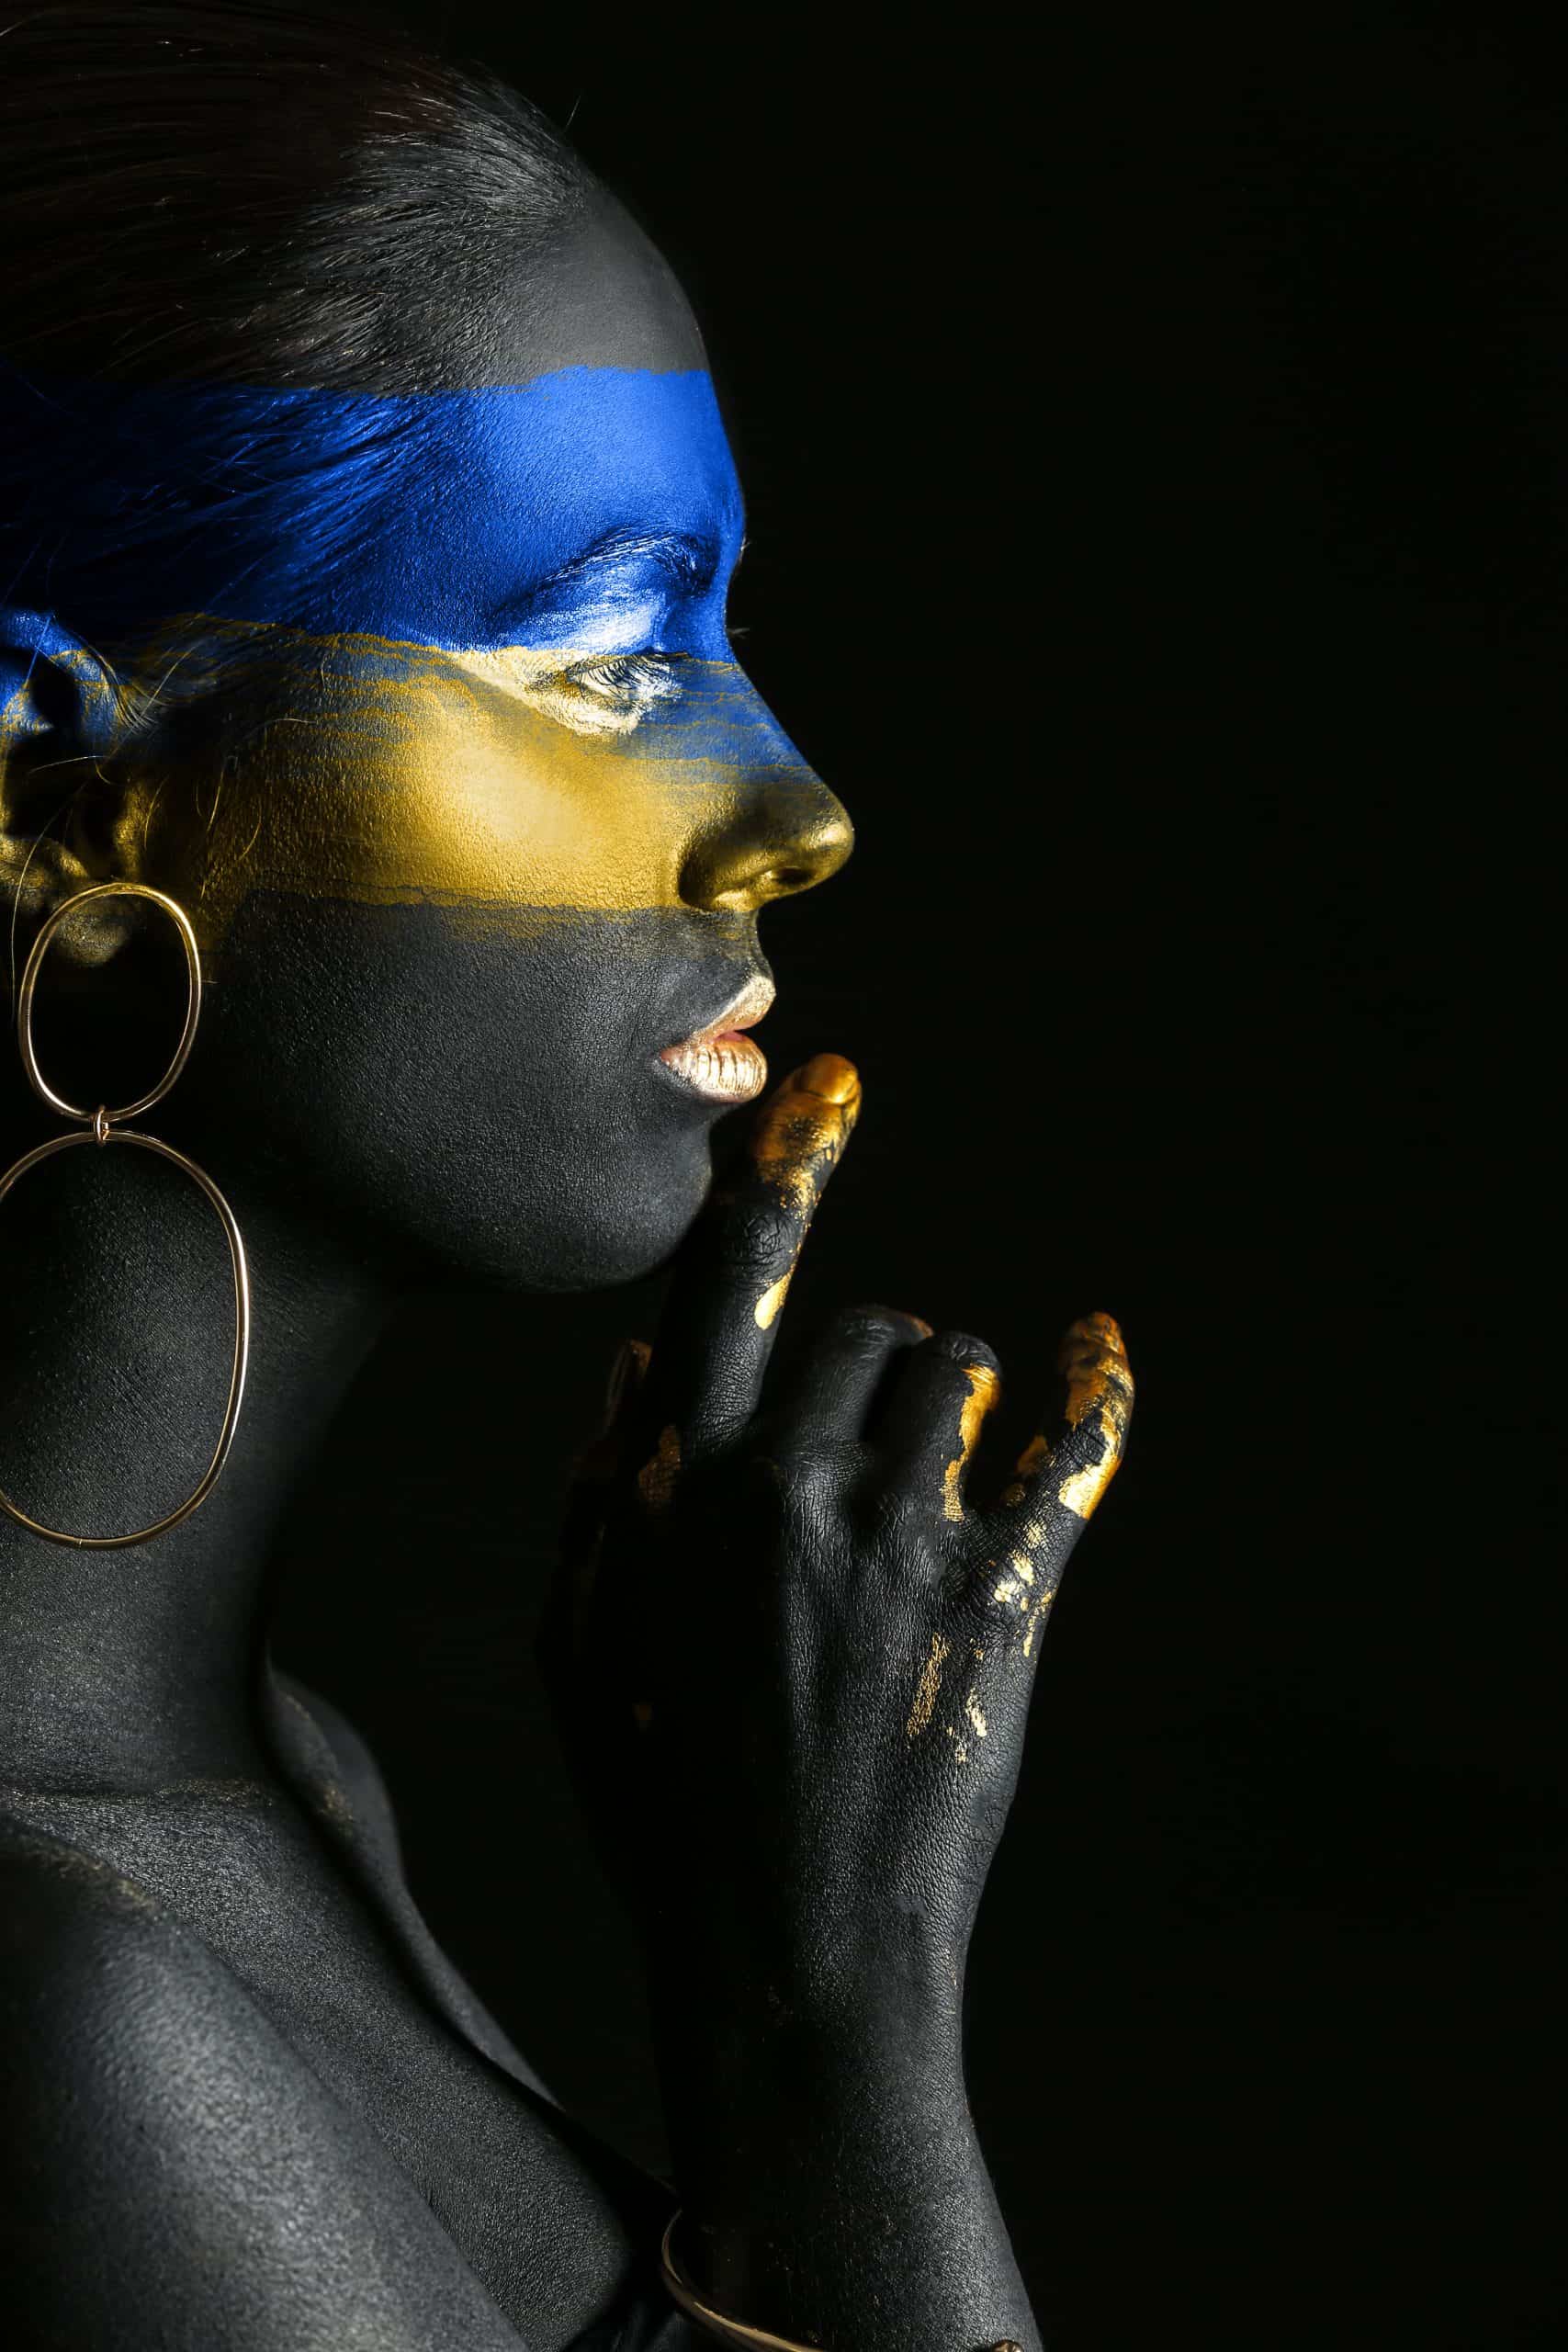 Young Ukrainian woman with blue and yellow paint on her body against dark background